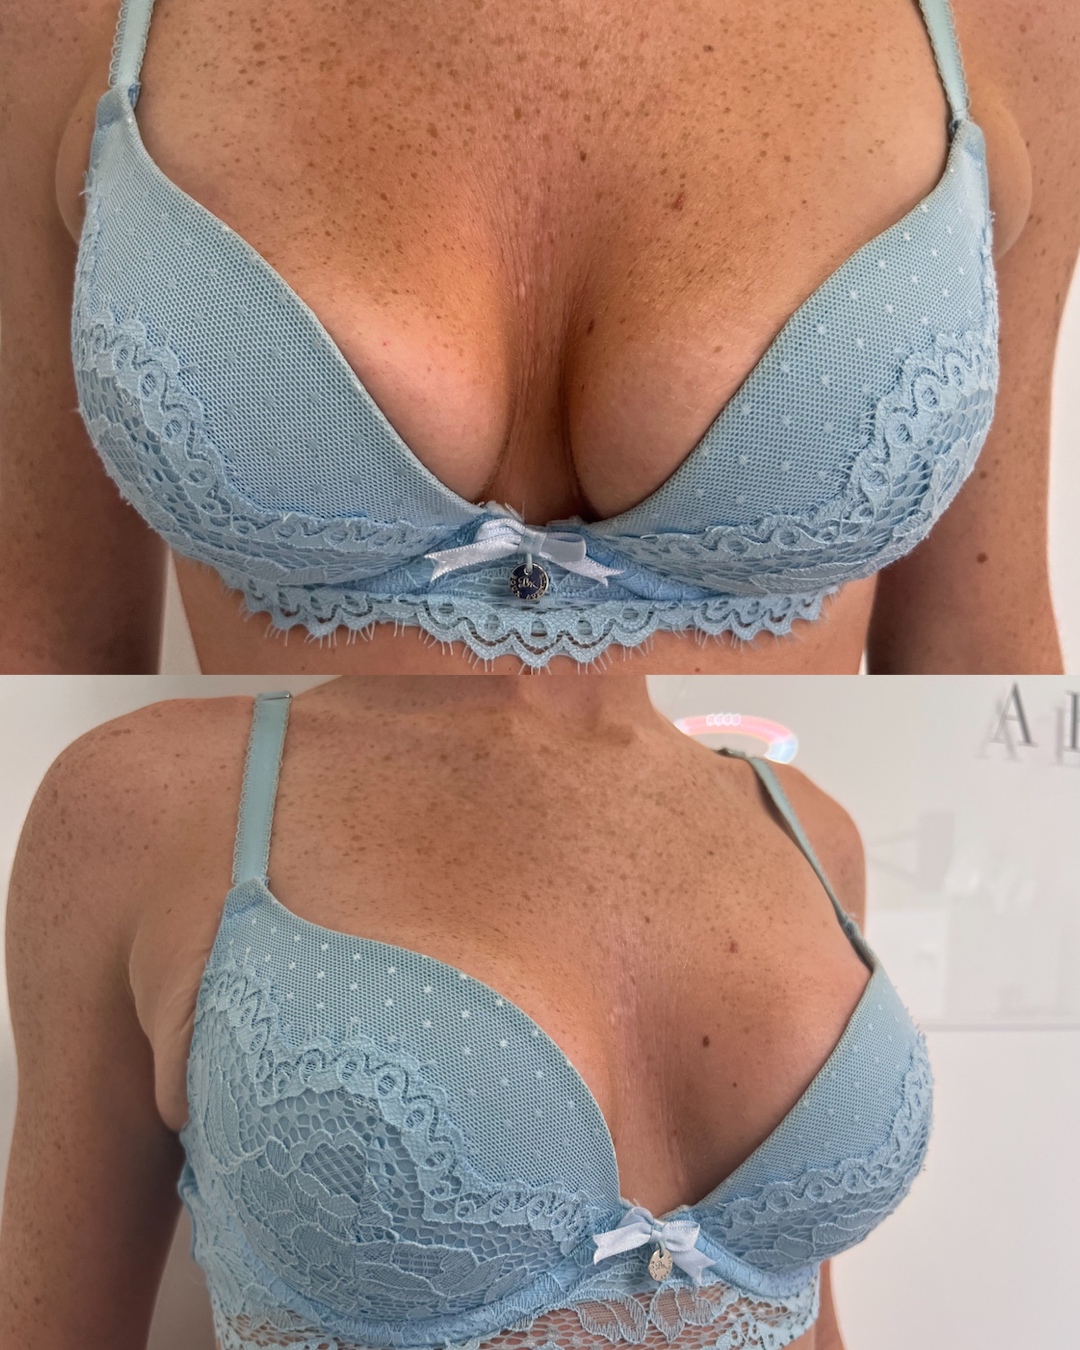 Non-Surgical Breast Enlargement Explored